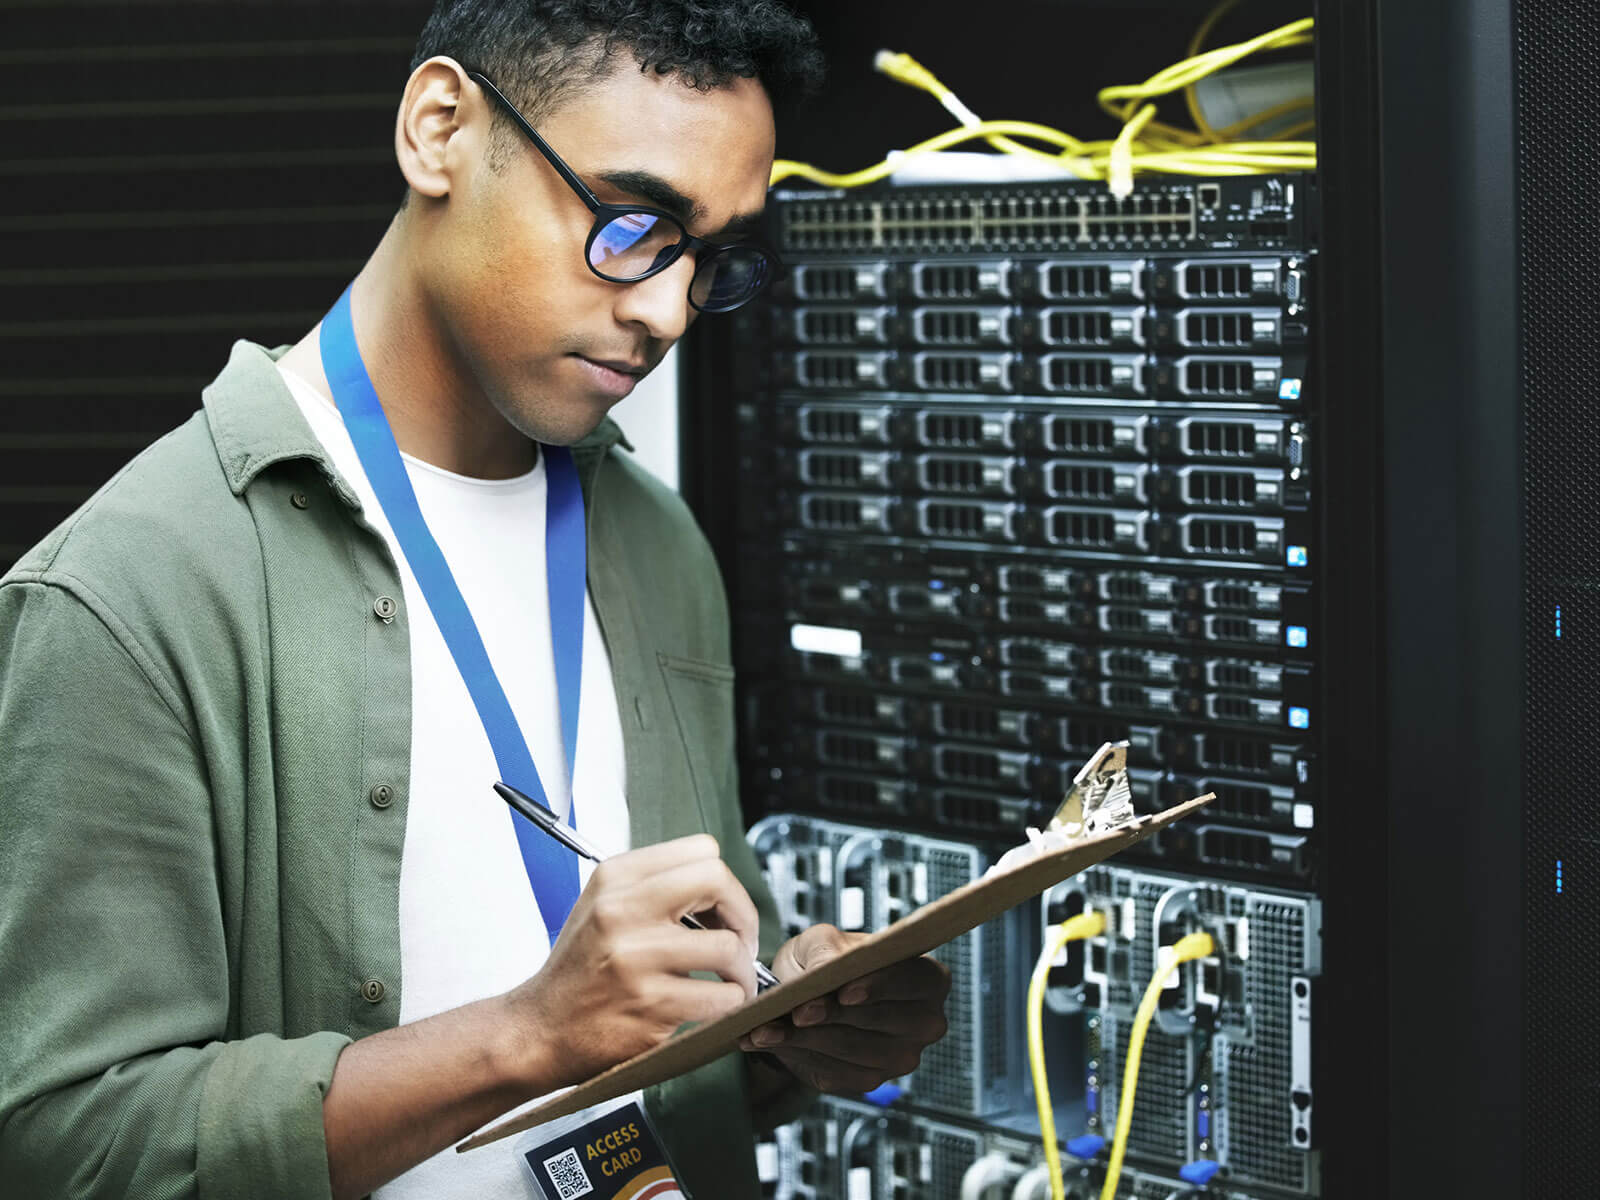 Young individual taking notes while working in a server room, indicating IT infrastructure management